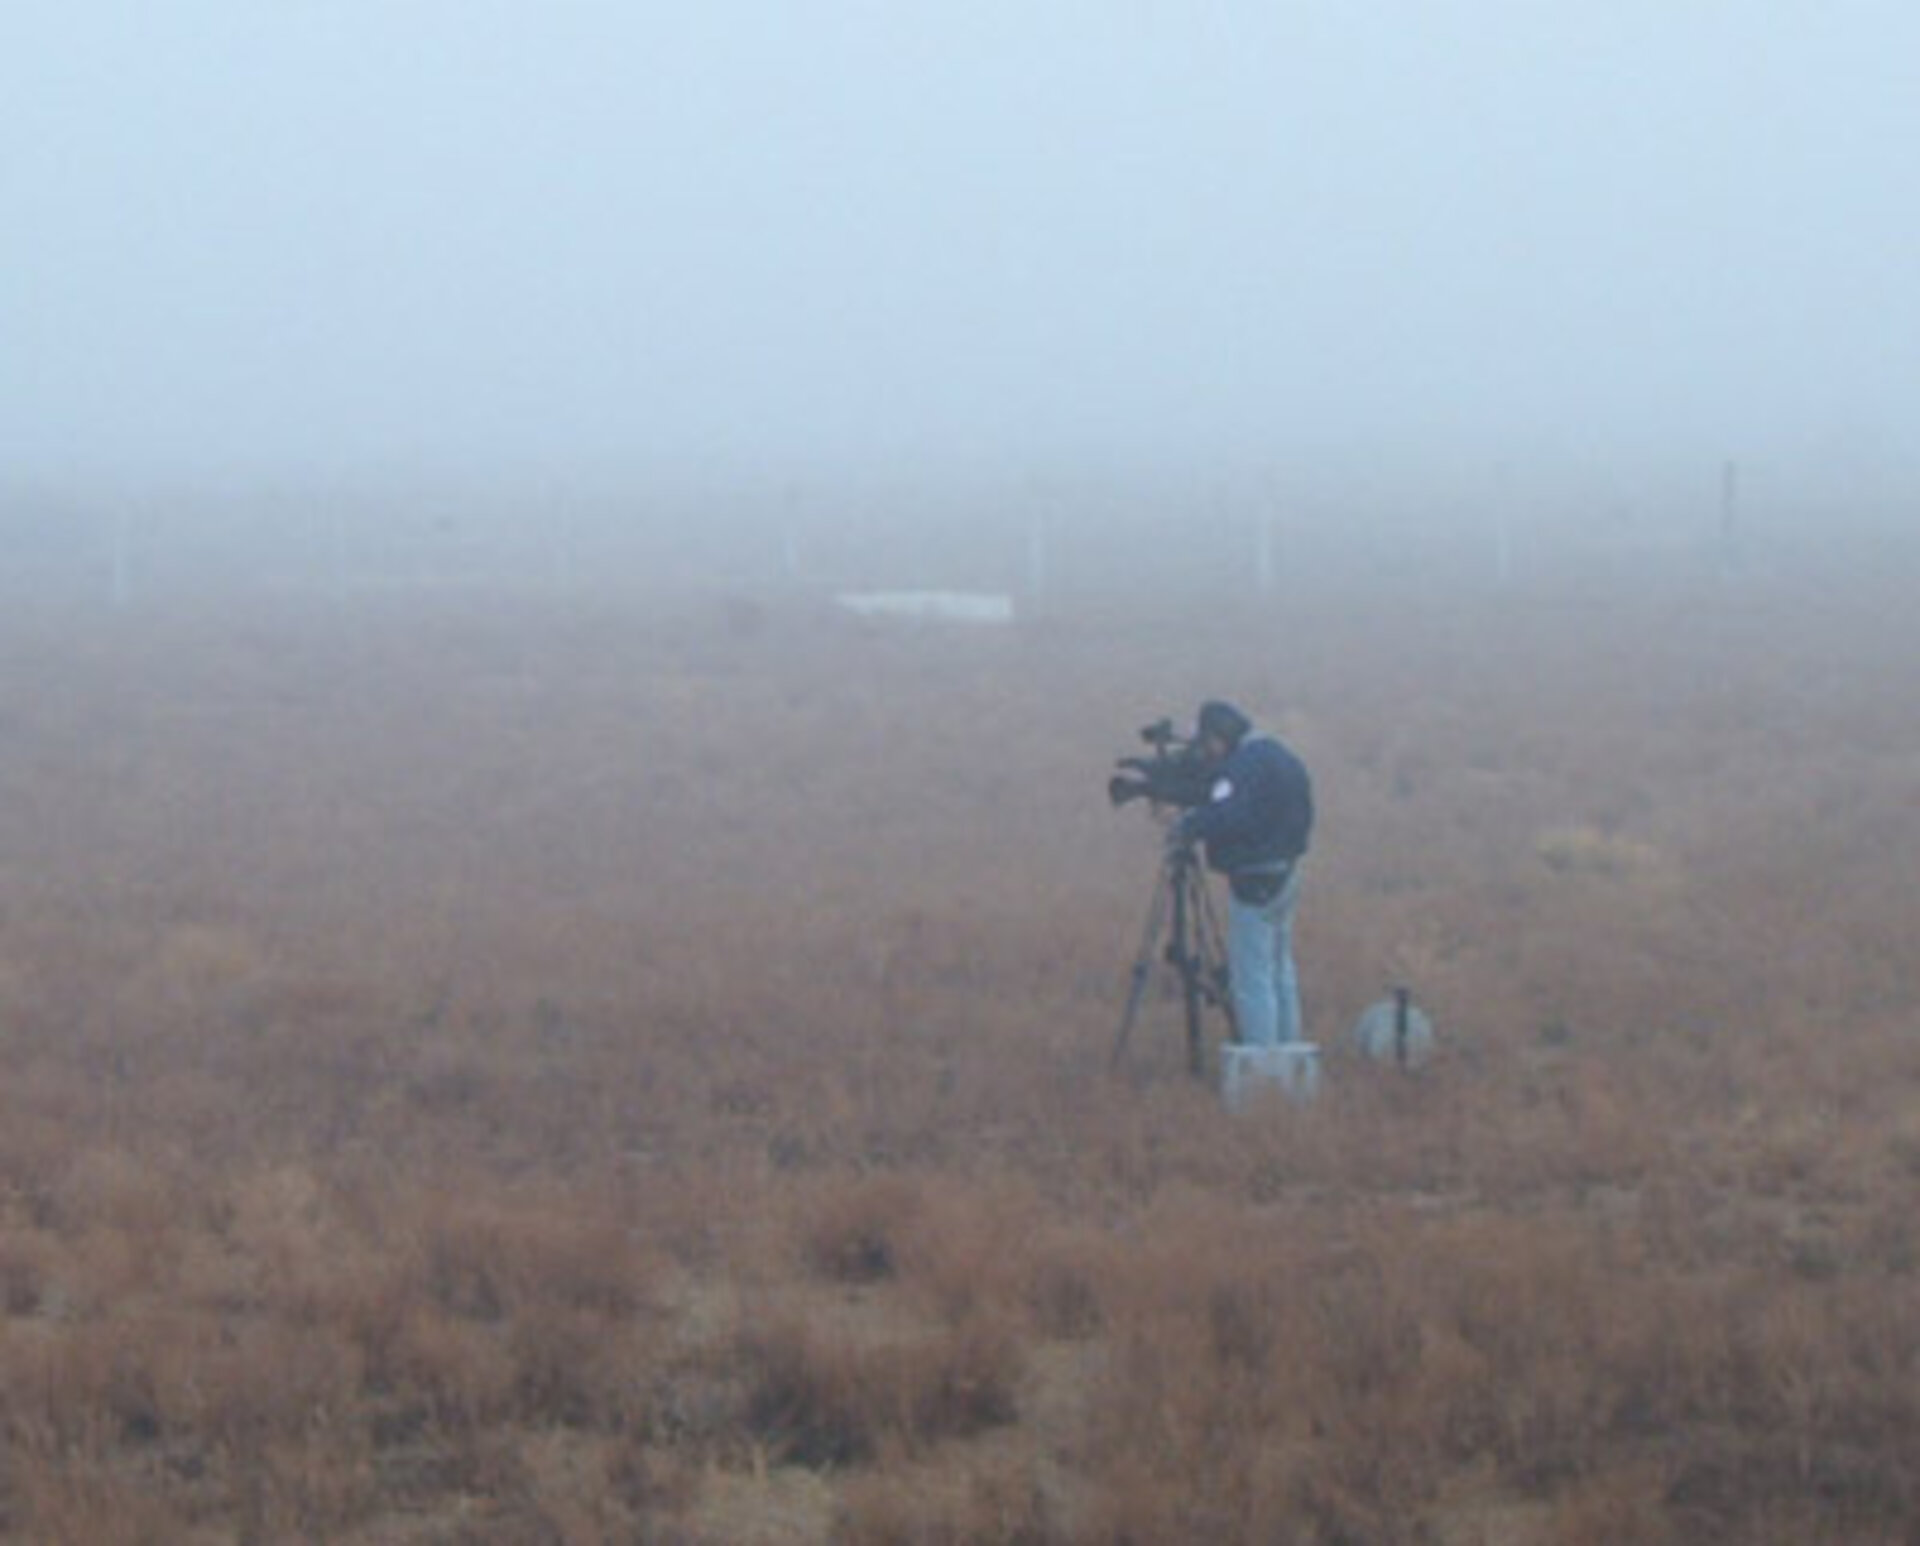 October 30 - Where is the Soyuz launcher? In vain looking through the mist